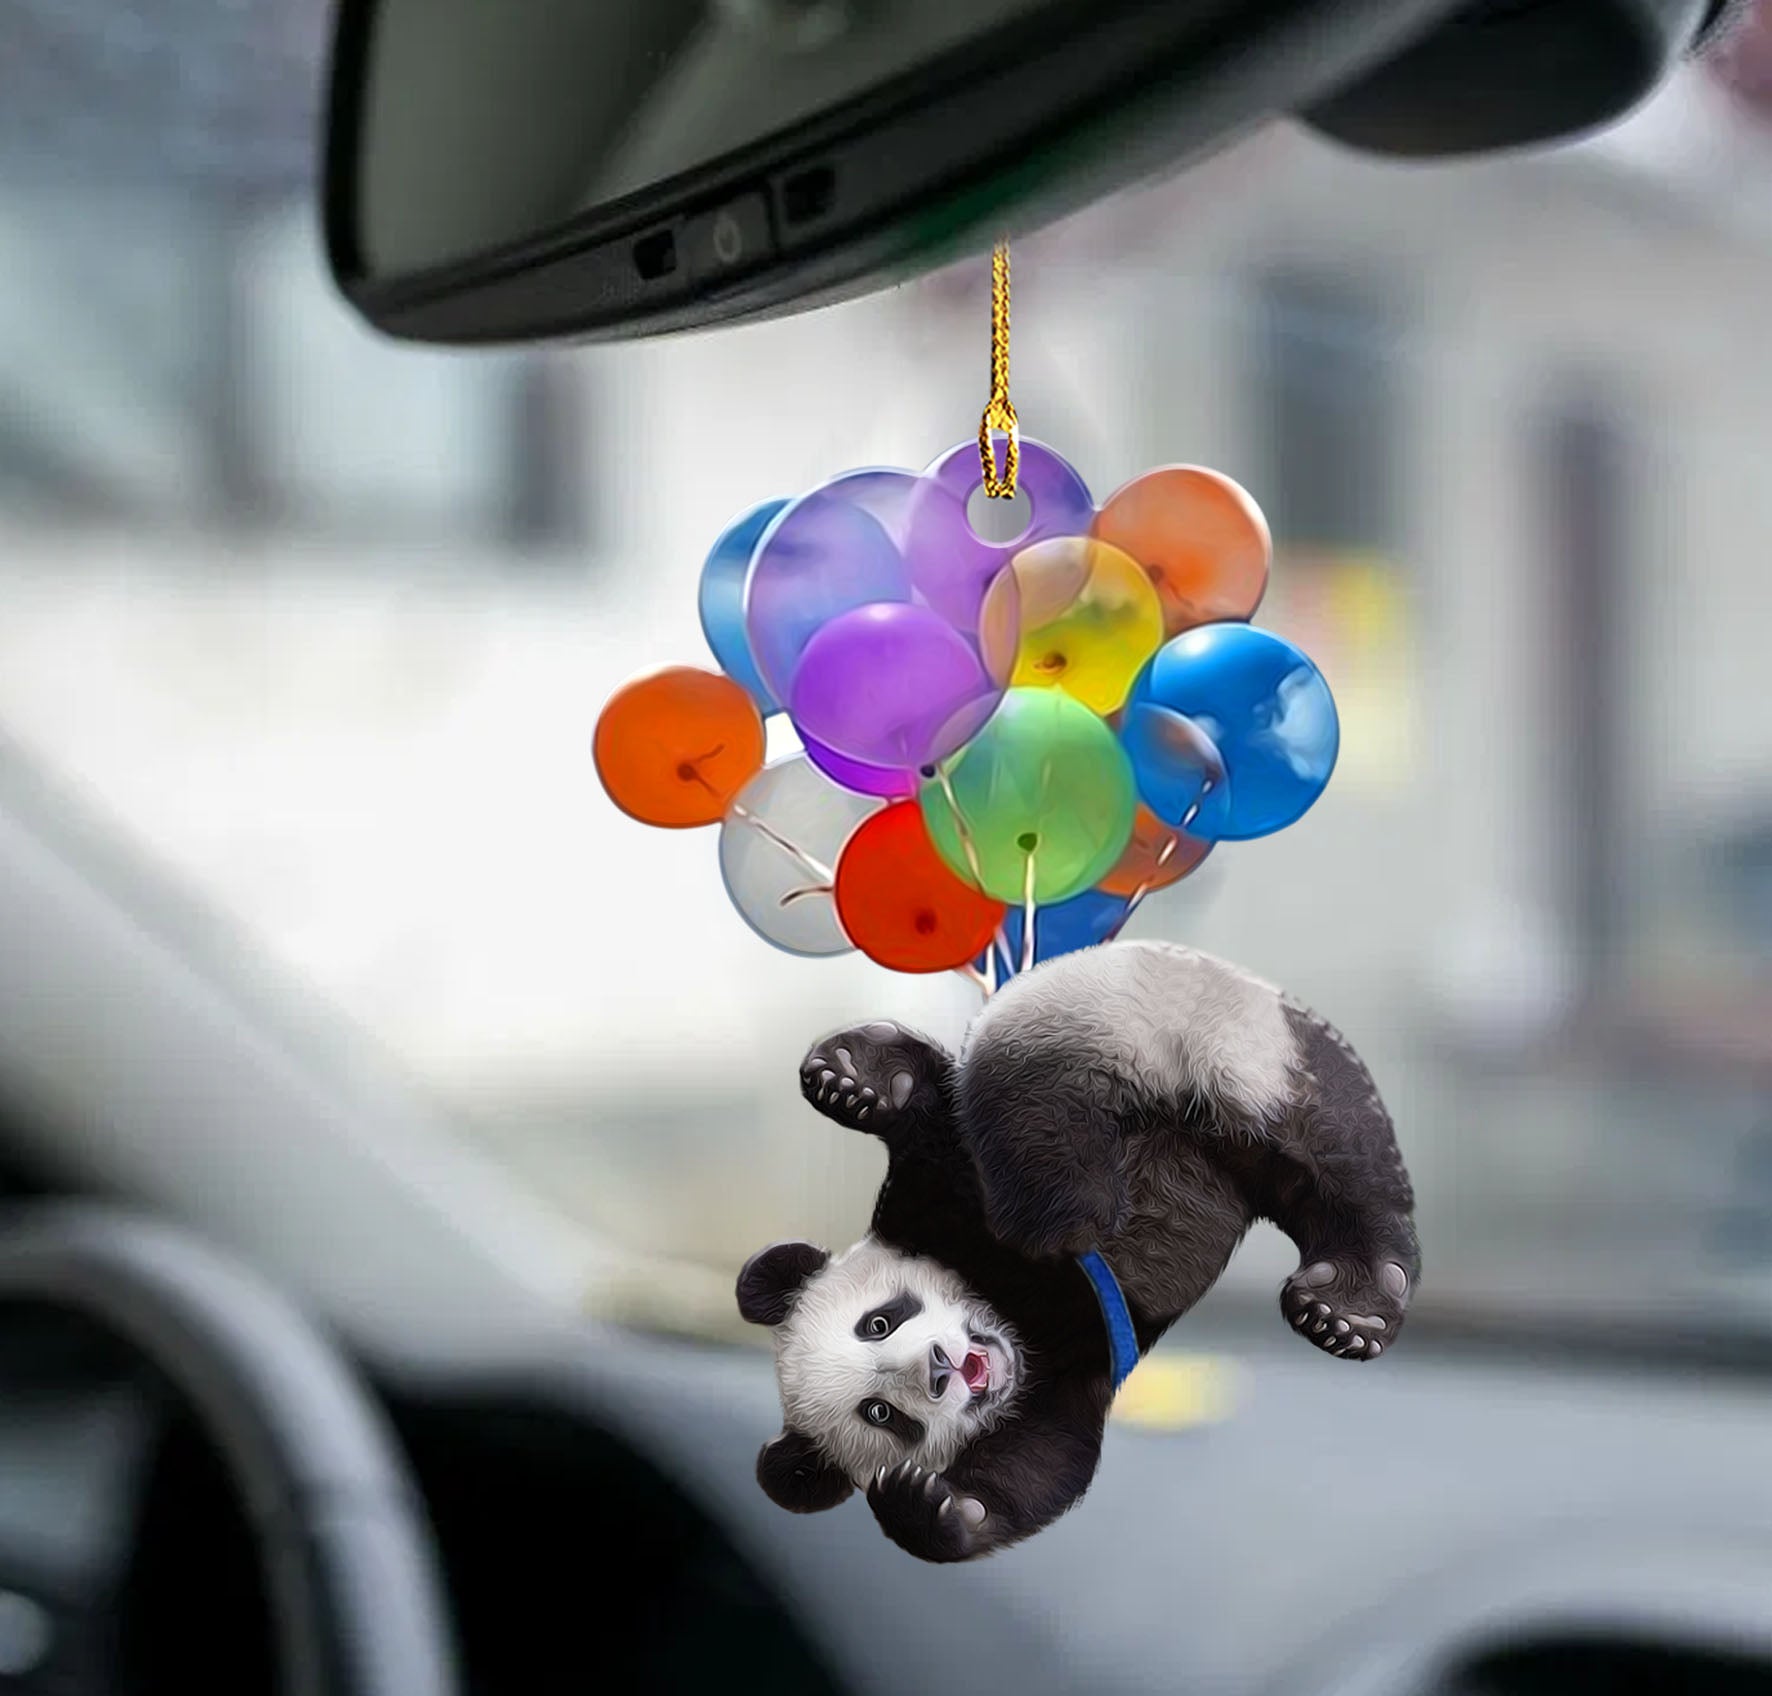 Panda fly with bubbles panda lovers ornament